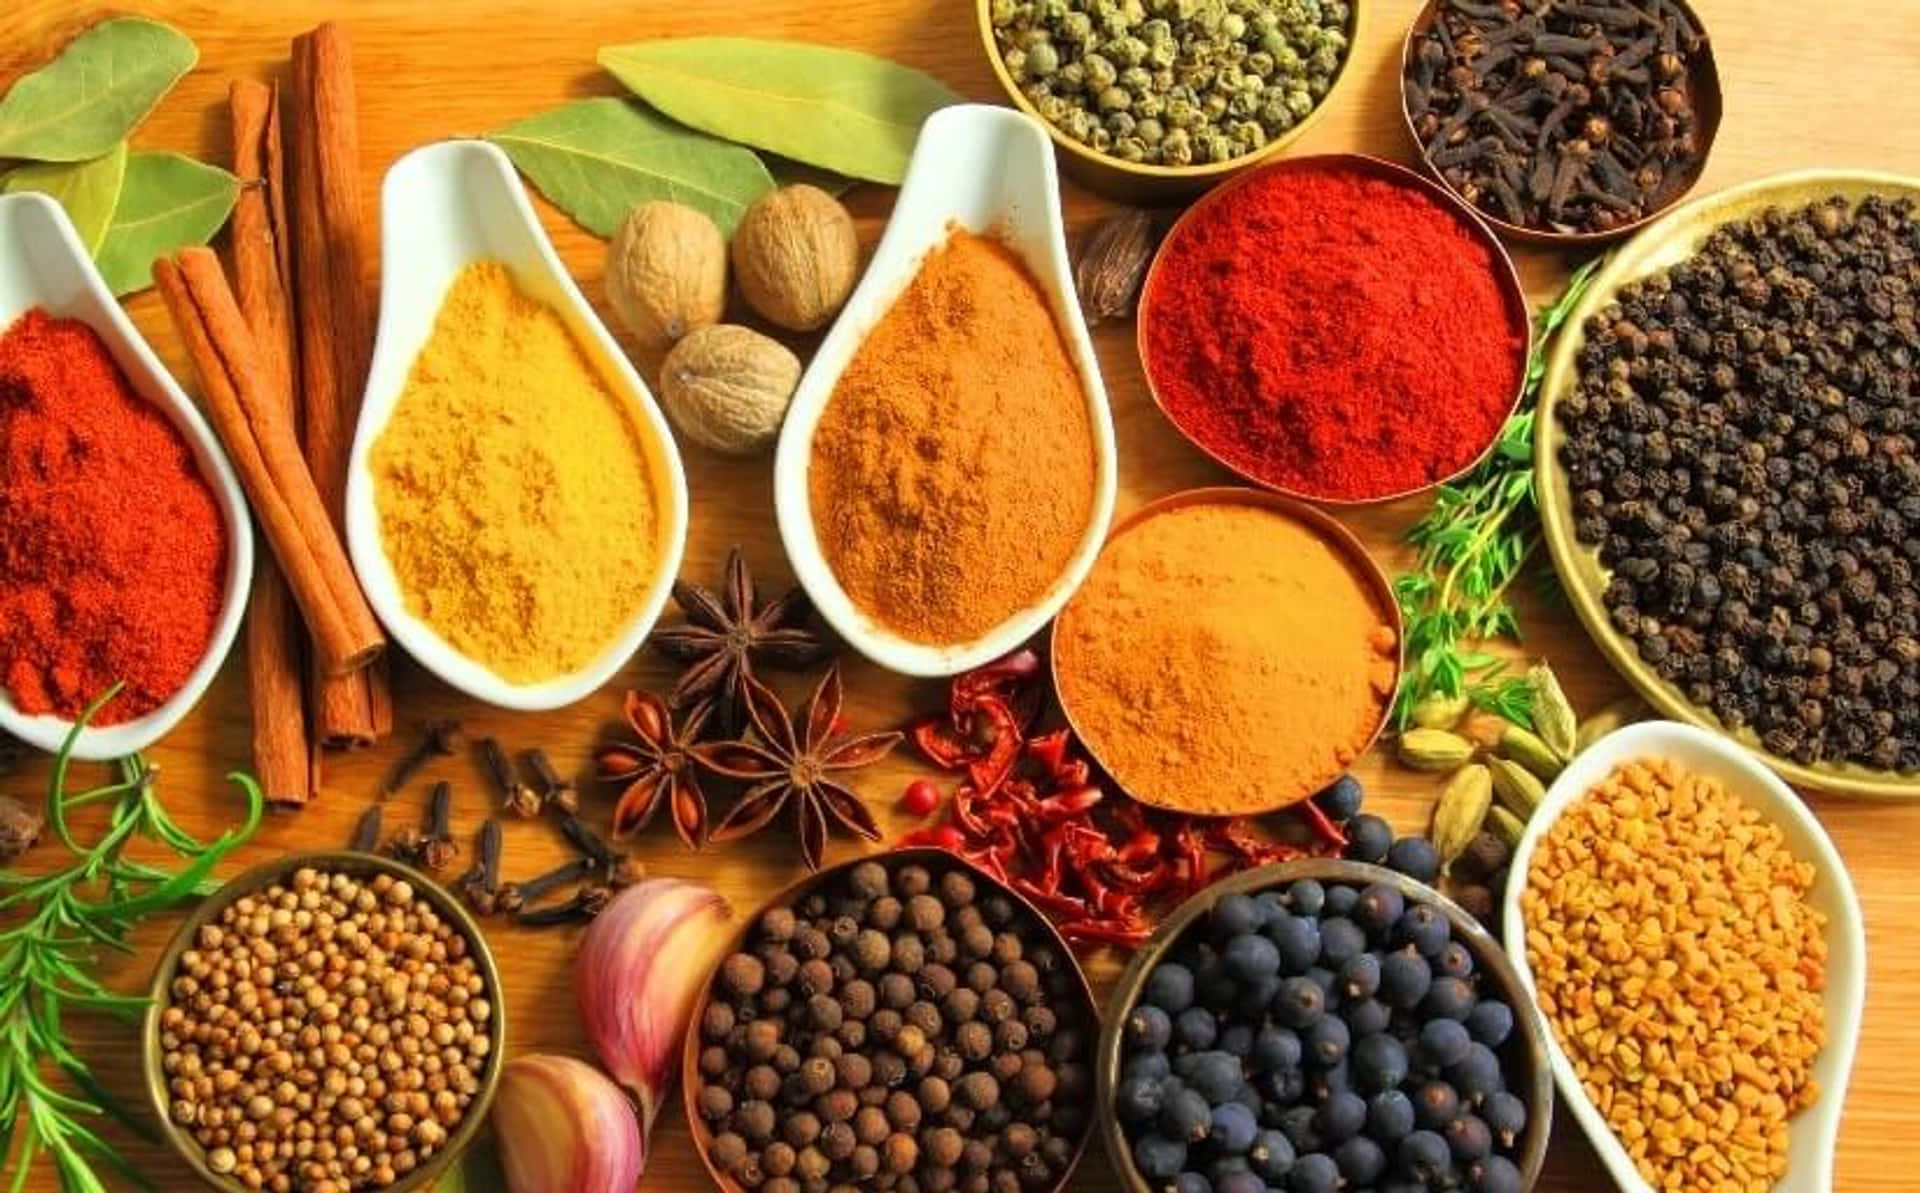 Colorful Spices On Wooden Surface Wallpaper